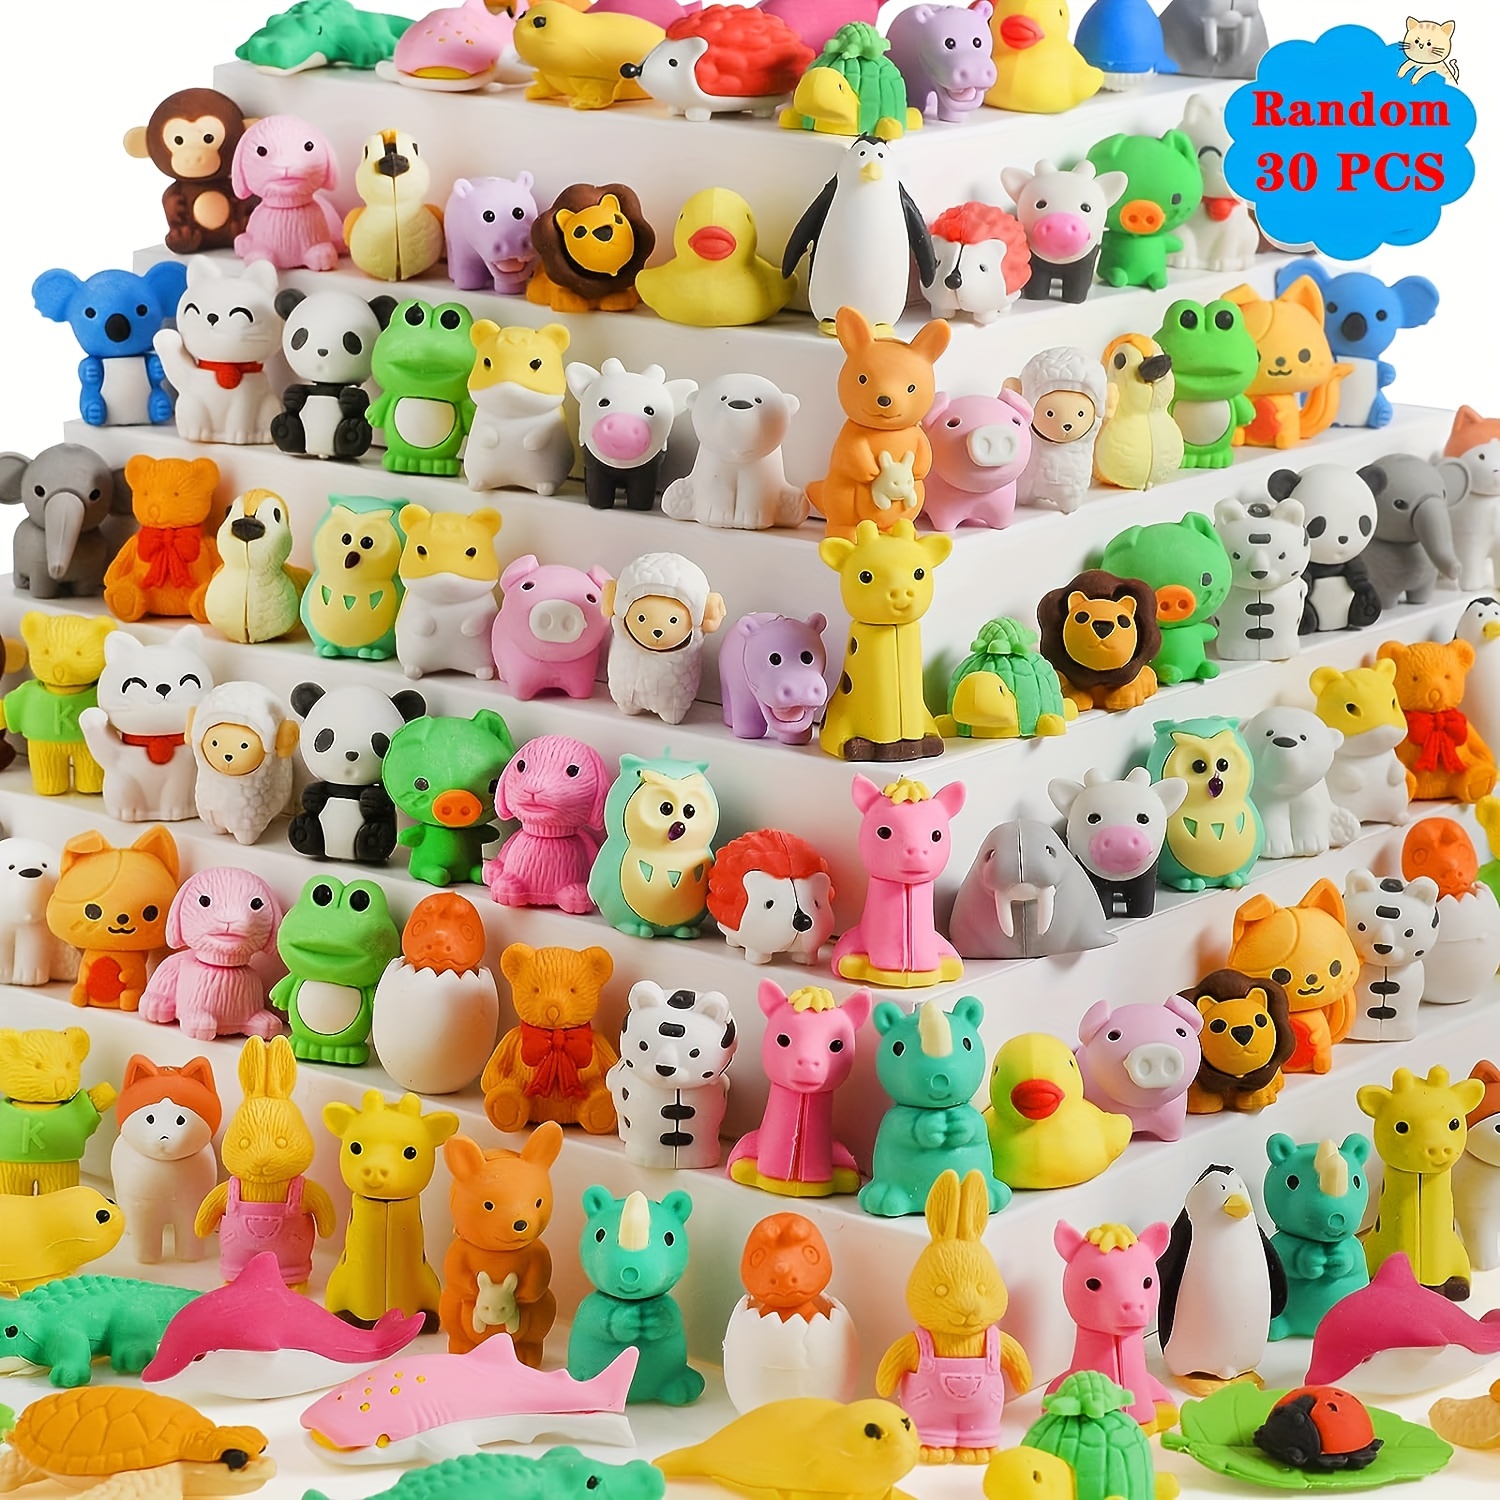 50pcs Animal Mini Erasers for Kids, Assortment Novelty Pencil Erasers Bulk  for Students Party Favor Home School Work Classroom Rewards Prizes Gift